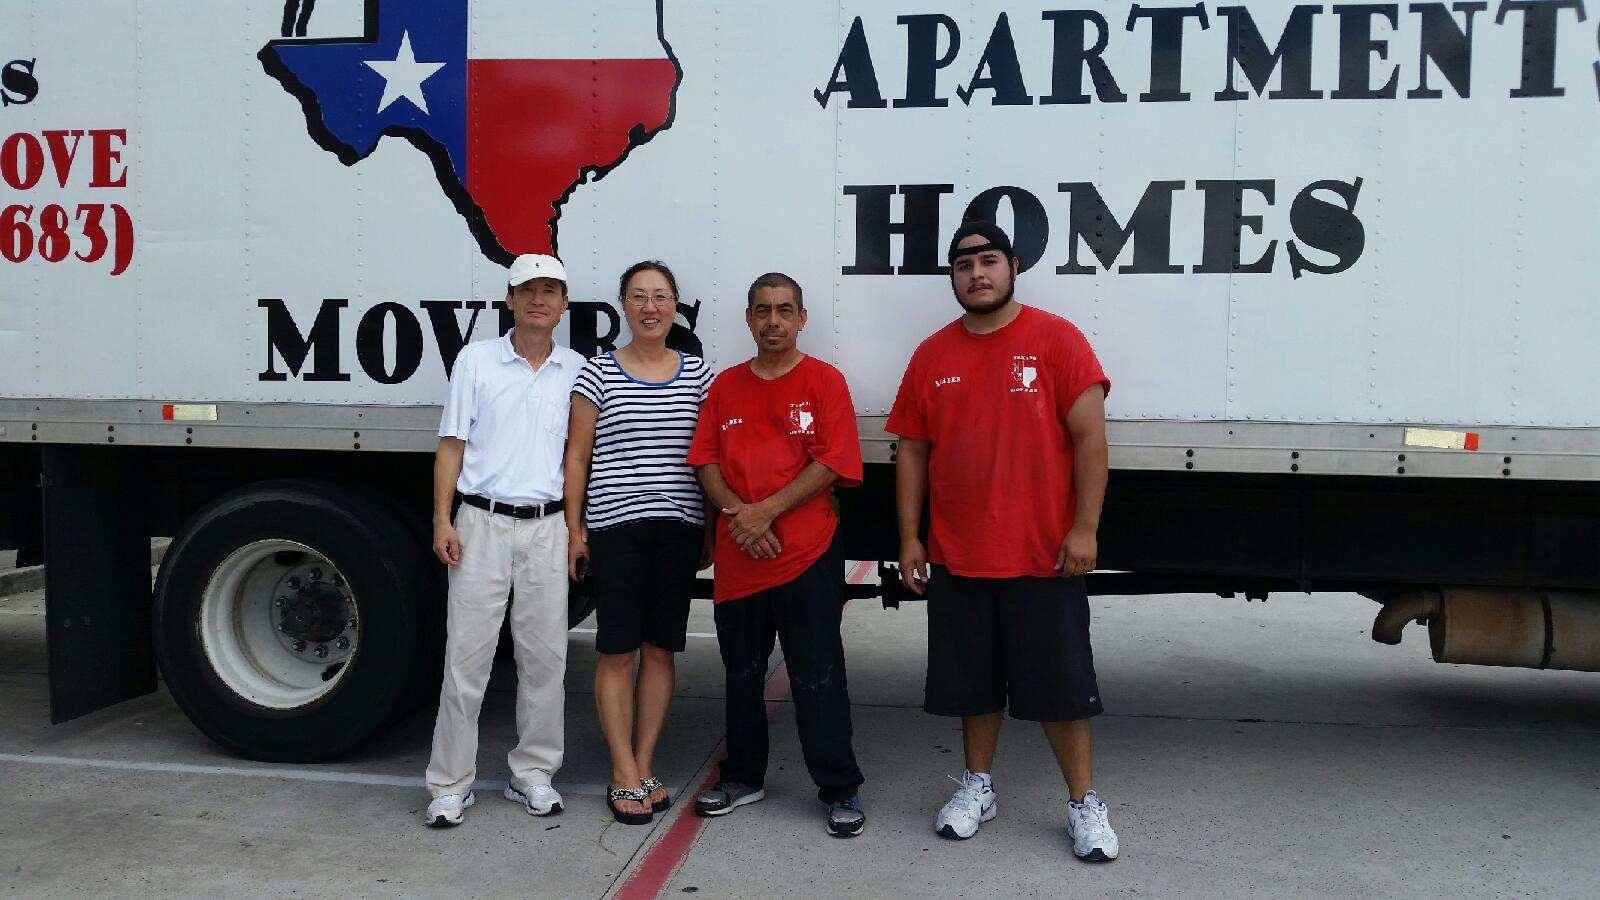 Leave Your Apartment Moving Woes to Nolanville, TX's Skilled Movers